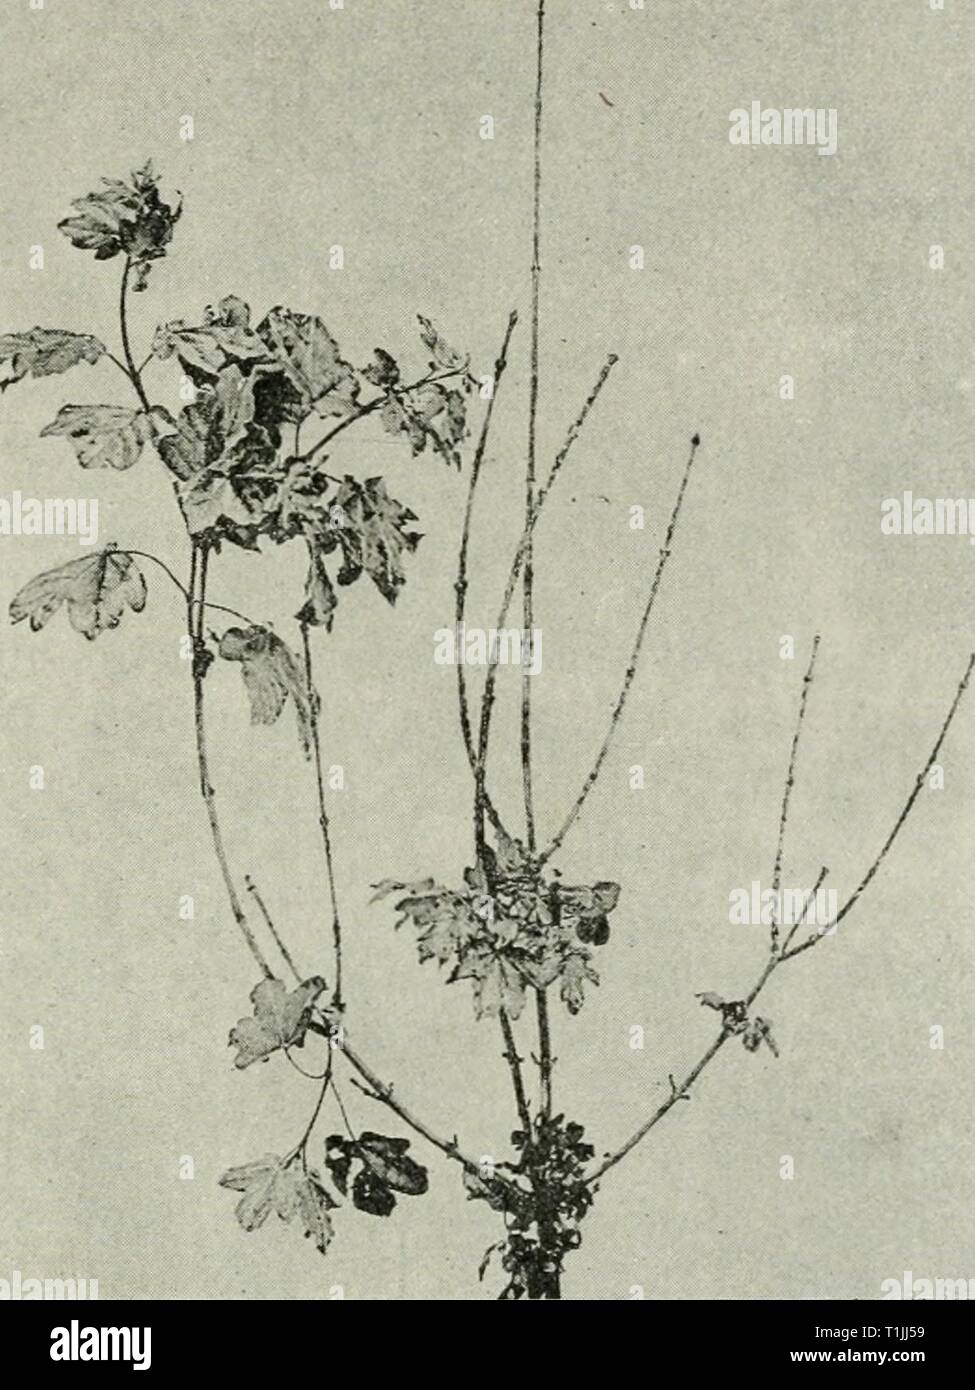 Diseases of plants induced by Diseases of plants induced by cryptogamic parasites; introduction to the study of pathogenic Fungi, slime-Fungi, bacteria, & Algae  diseasesofplant00tube Year: 1897  PESTALOZZINA. 495 Pestalozzina Soraueriana Sacc. occurs on foxtail grass {Alopecurus pratcnds). The conidial tufts develop on spots which appear on the gradually withering leaves. The bristle-appendages on the terminal cell of the conidia are lateral, only one being terminal. This disease was first observed by Weinzierl at Vienna,    Fig. 305.—Sfptogloeum Bartif/kmum on Acer carivptstre. The dead twig Stock Photo